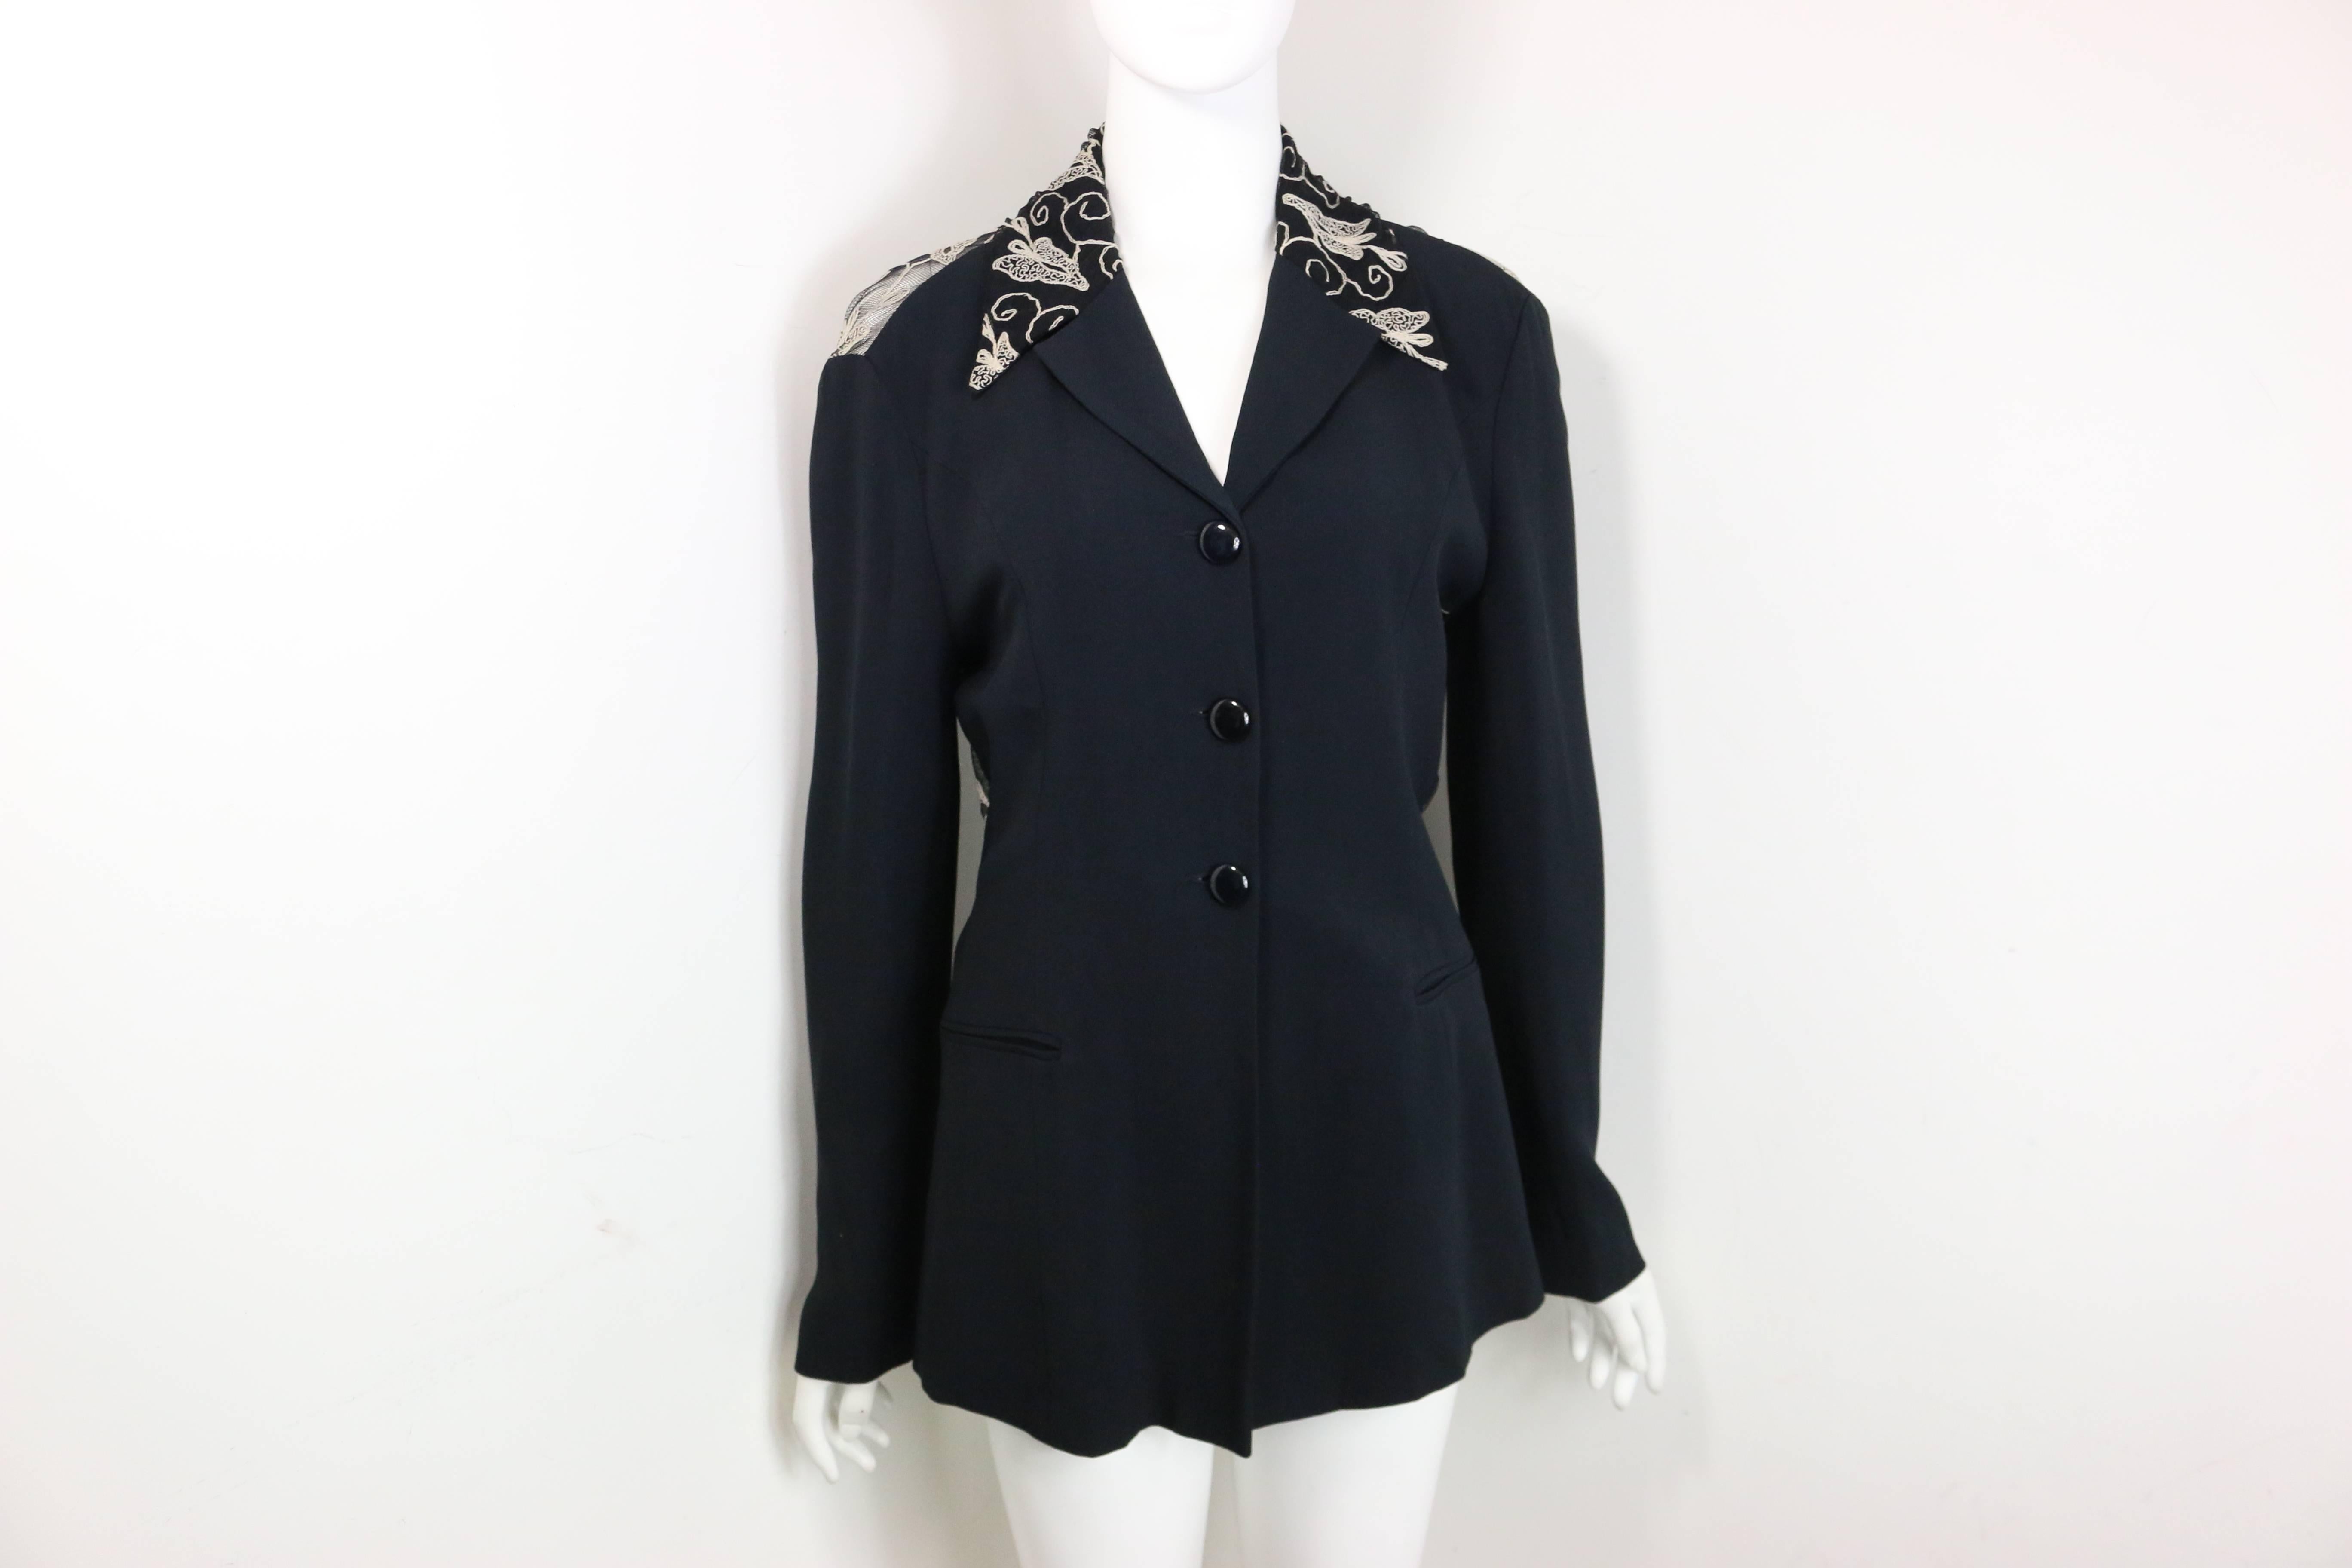 - Vintage 90s Batik Black Jersey Jacket with white embroidered leaves pattern lace behind. Featuring three black buttons closure with two front slip pockets. Such a beautiful jacket with embroidered details behind! 

- Made in Italy. 

- Size IT42,